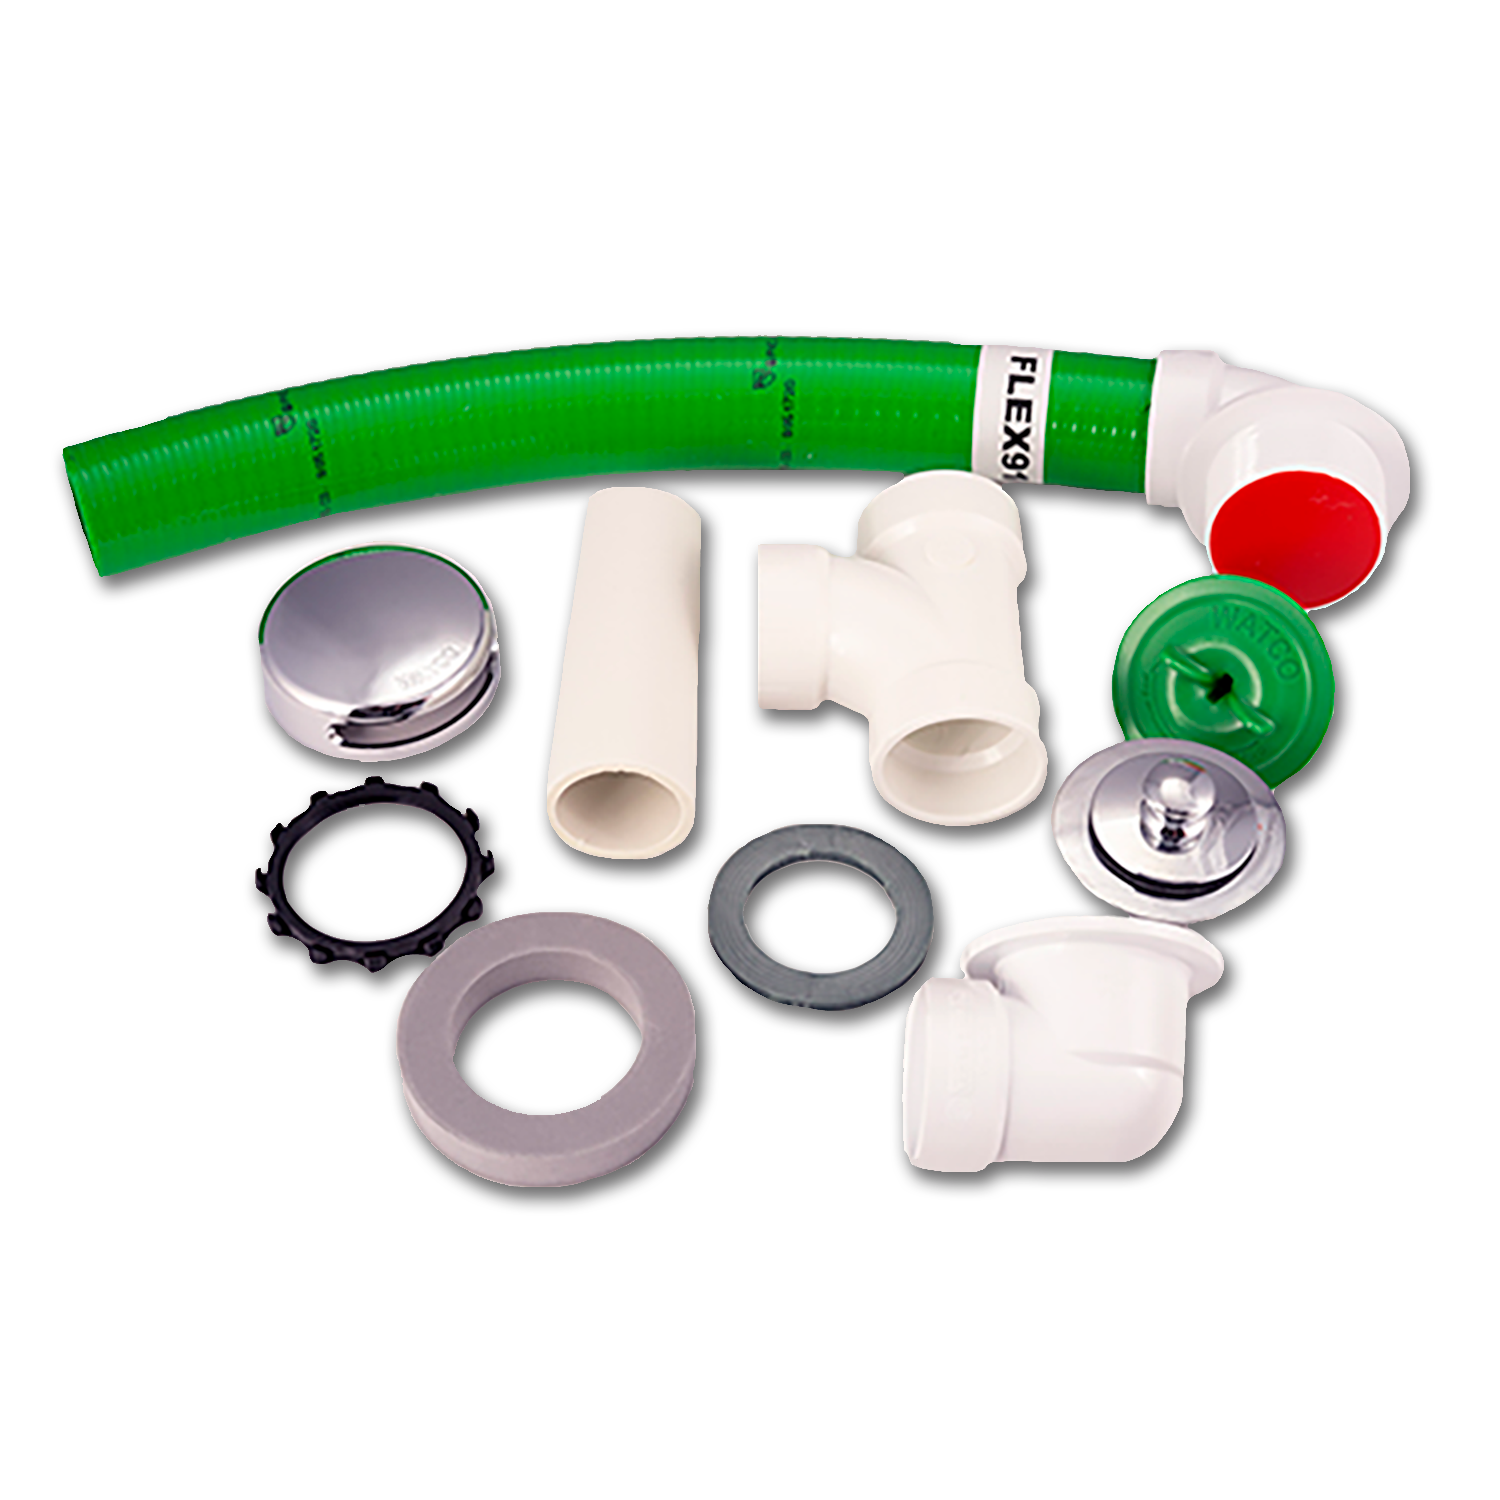 Bath waste & overflow kit - made with flexible PVC tubing! 